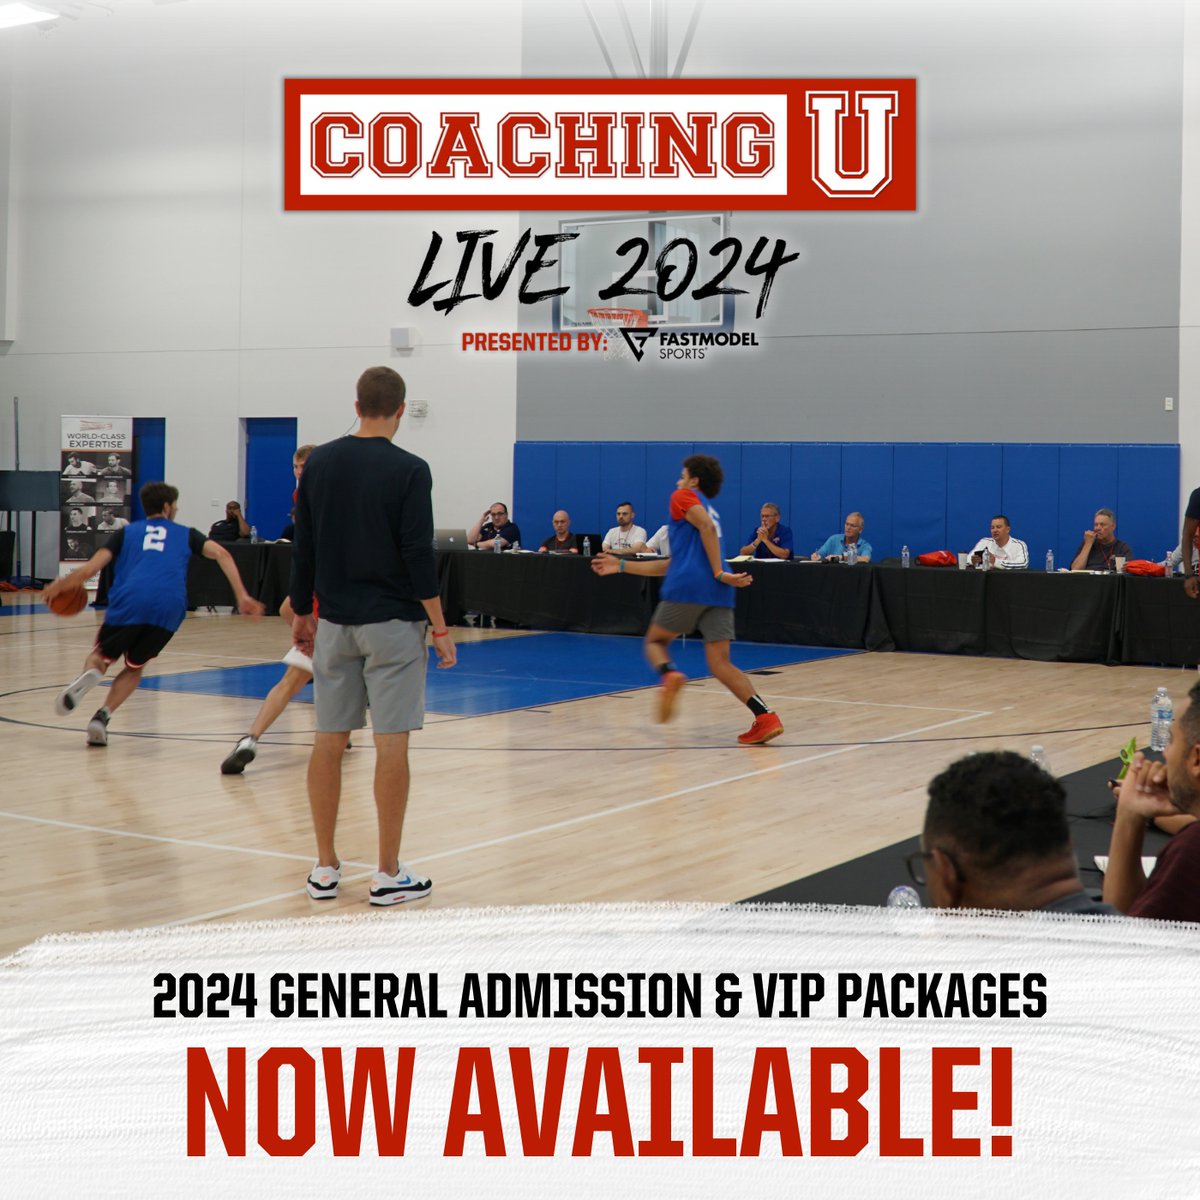 🏀 Join us in Las Vegas this summer for Coaching U Live 2024 pres. by @fastmodel ⌛ Early Bird Savings Available! ✍️ General Admission: $175 🏆 VIP Package: $350 🗓️ July 13-14, 2024 📍 Las Vegas, NV 🎟️ Save your seat TODAY! 🔗 coachingulive.com/2024